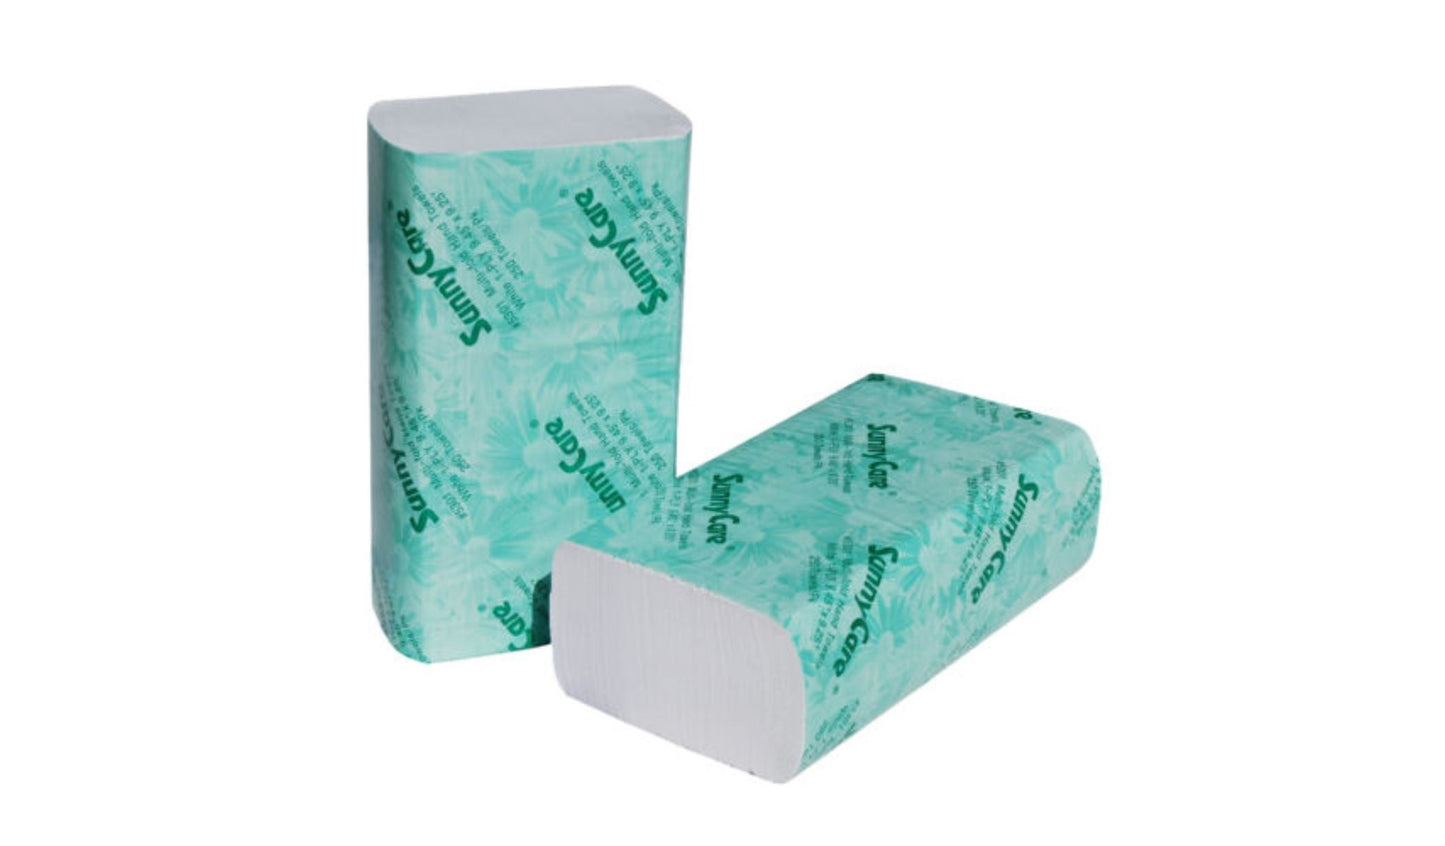 4000/cs SunnyCare Multifold Paper Towels